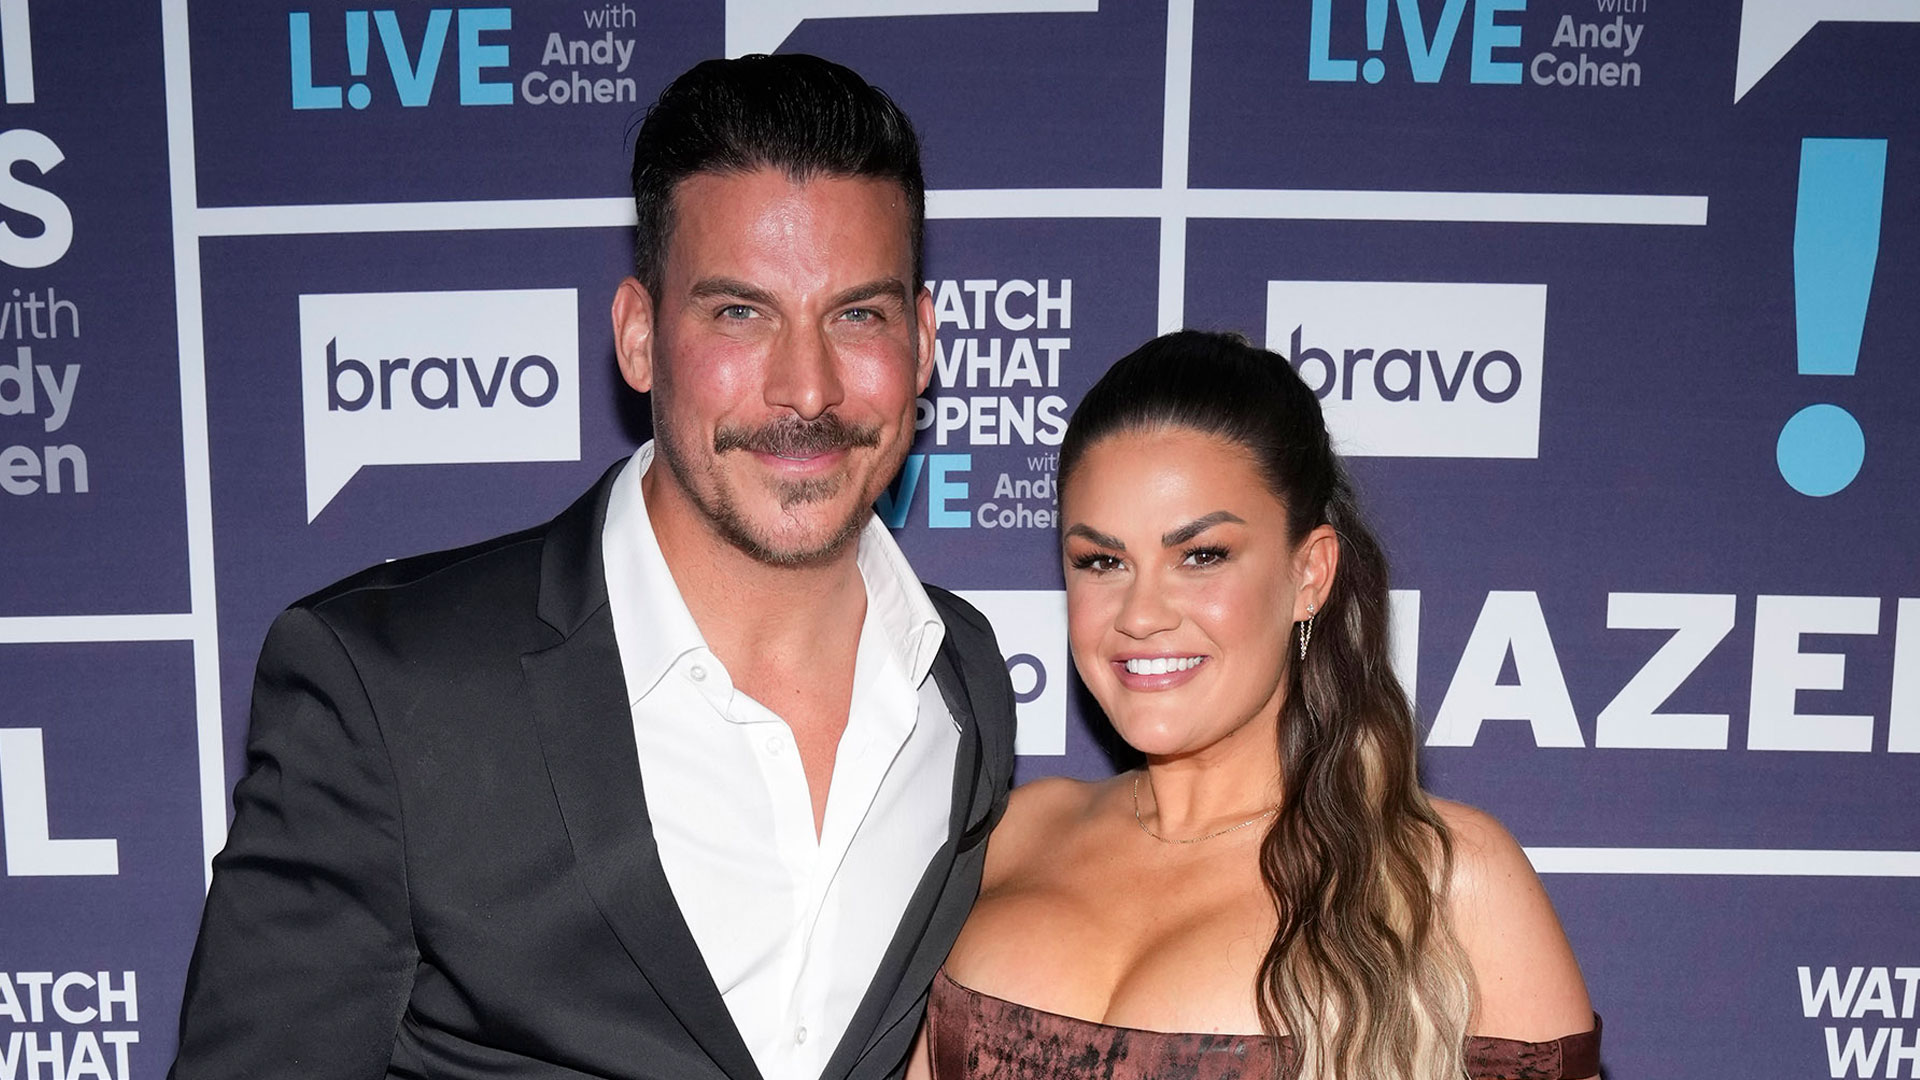 Brittany Cartwright changes her name just days after sudden separation from husband Jax Taylor